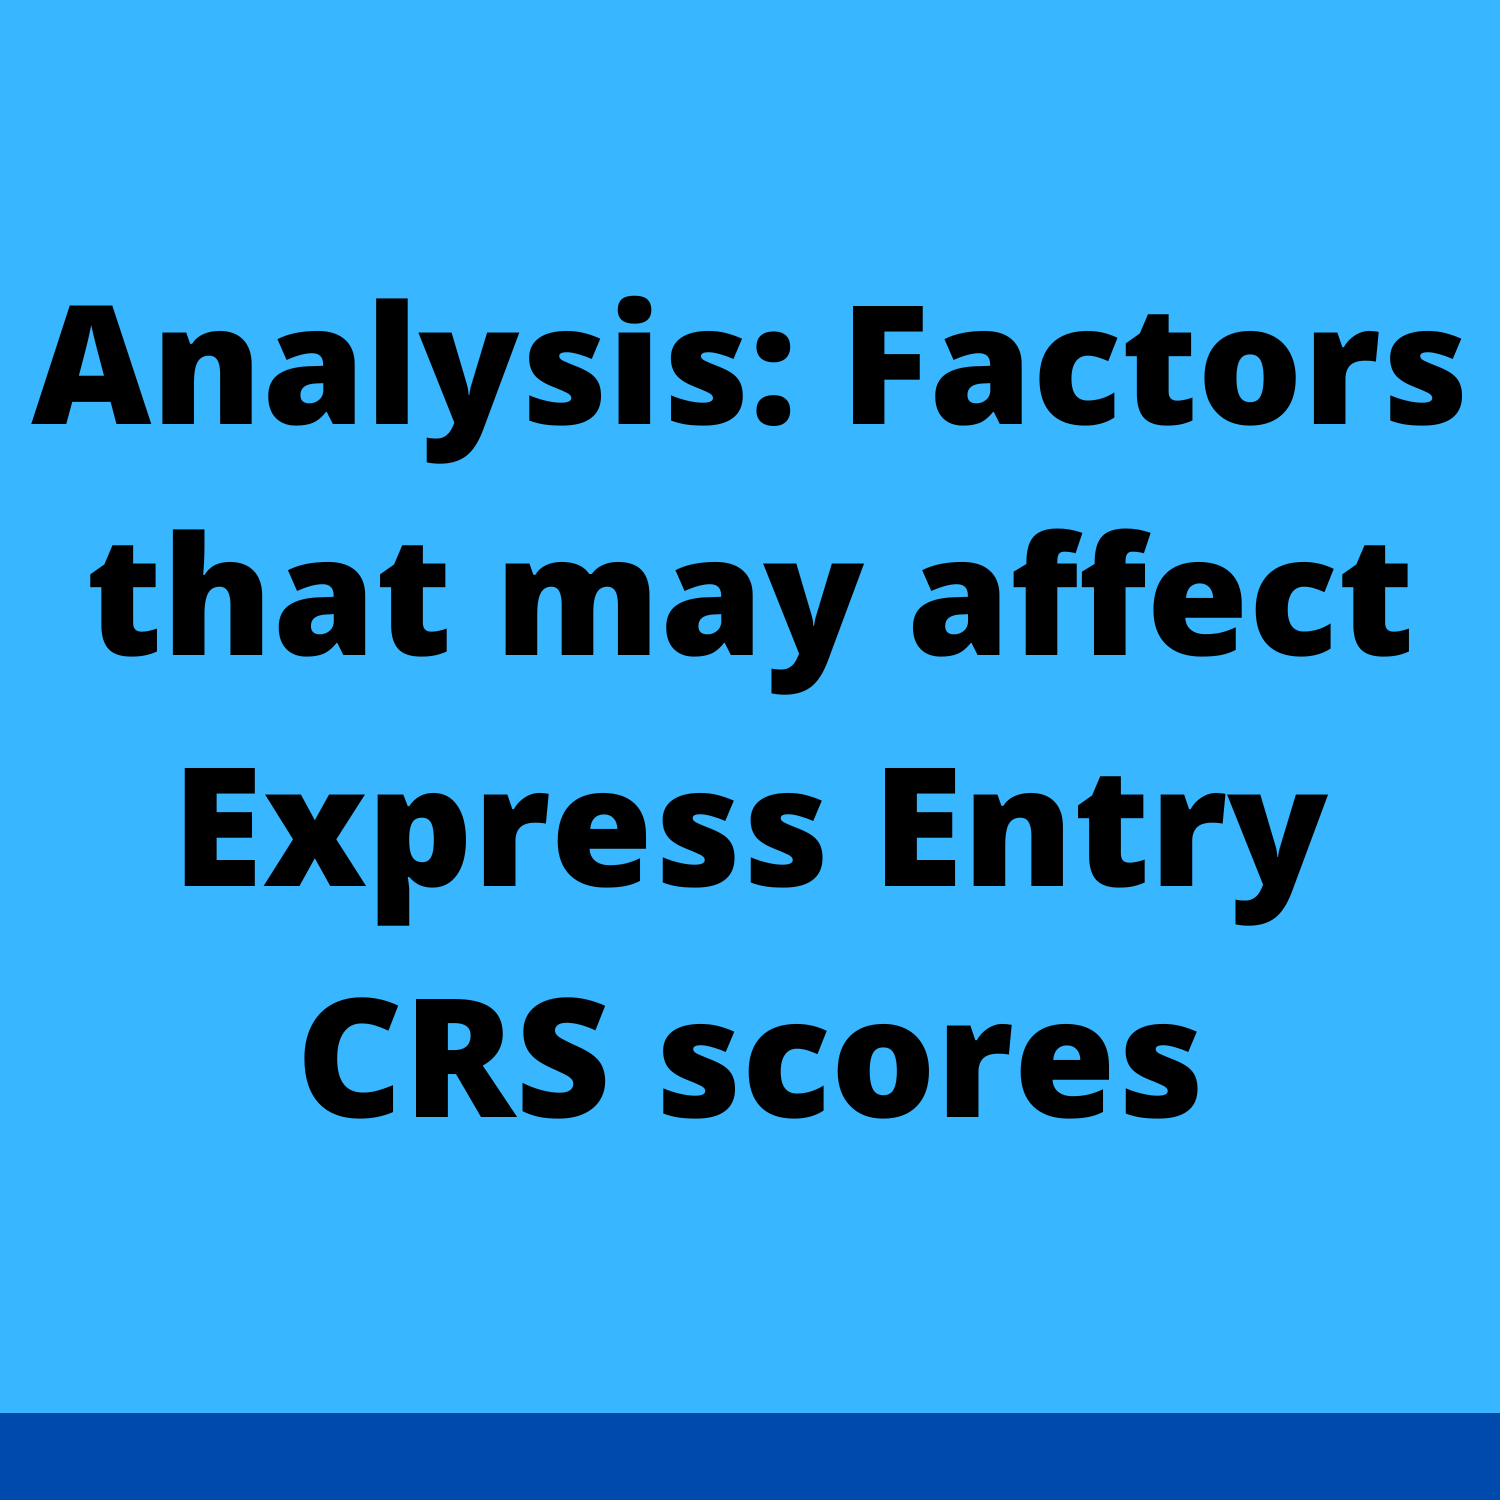 Analysis: Factors that may affect Express Entry CRS scores